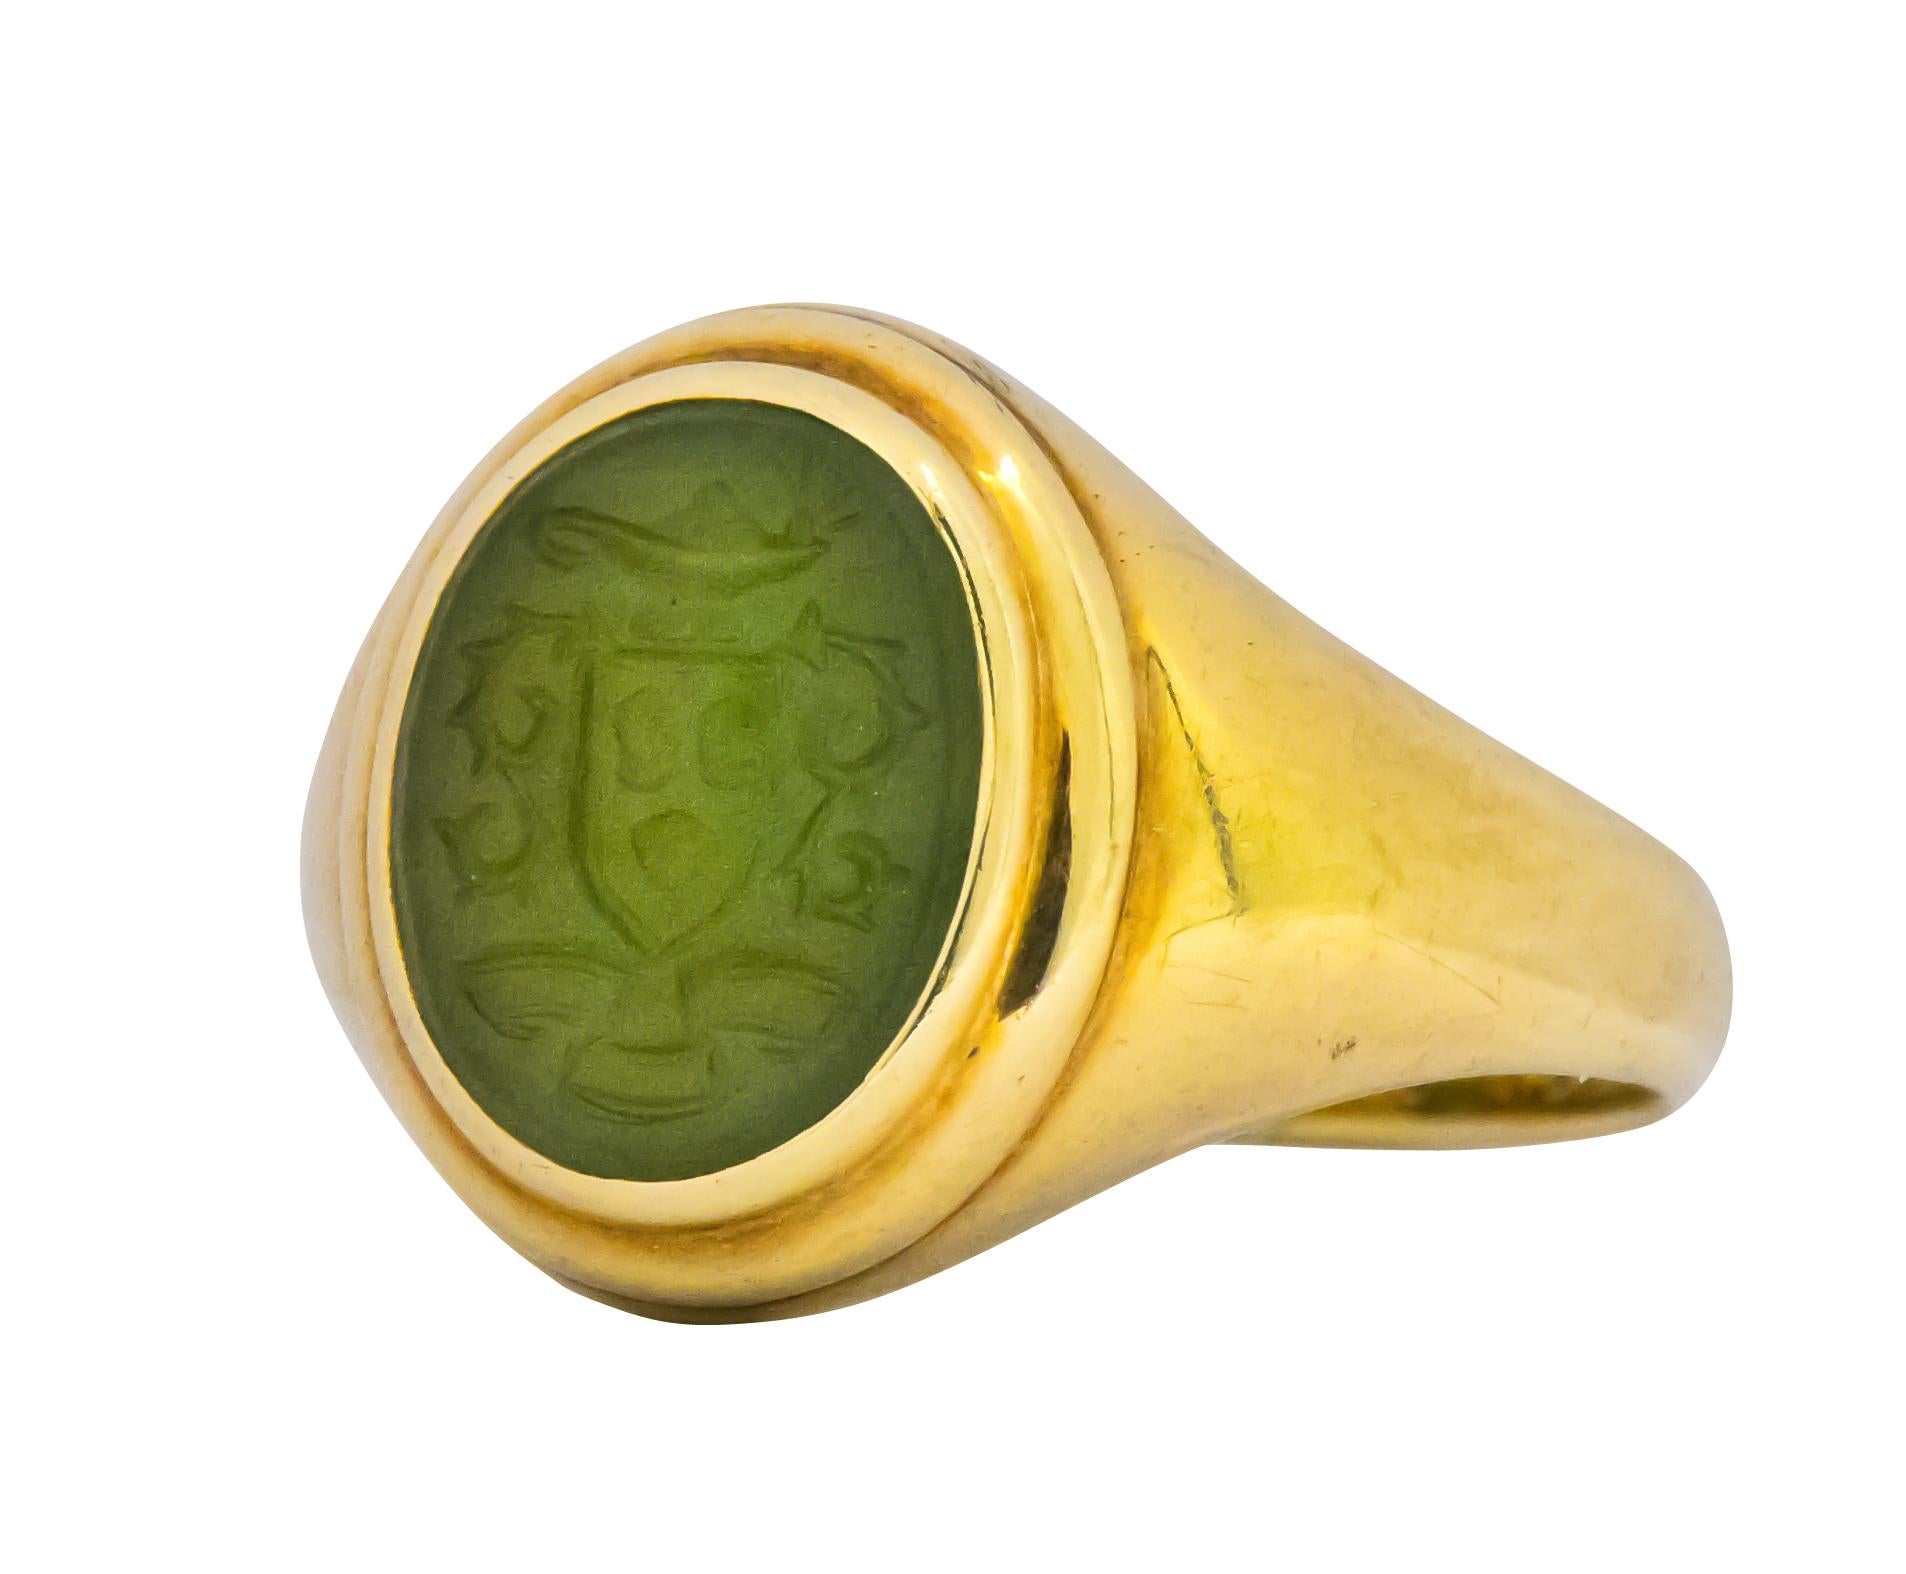 Very fun and unique vintage Tiffany & Co. Aladdin carved jade intaglio seal ring. The jade depicts a magic lamp, a shield, swirls and three circular objects. The beautifully carved oval jade is bezel set in 14K yellow gold. The inside of the ring is